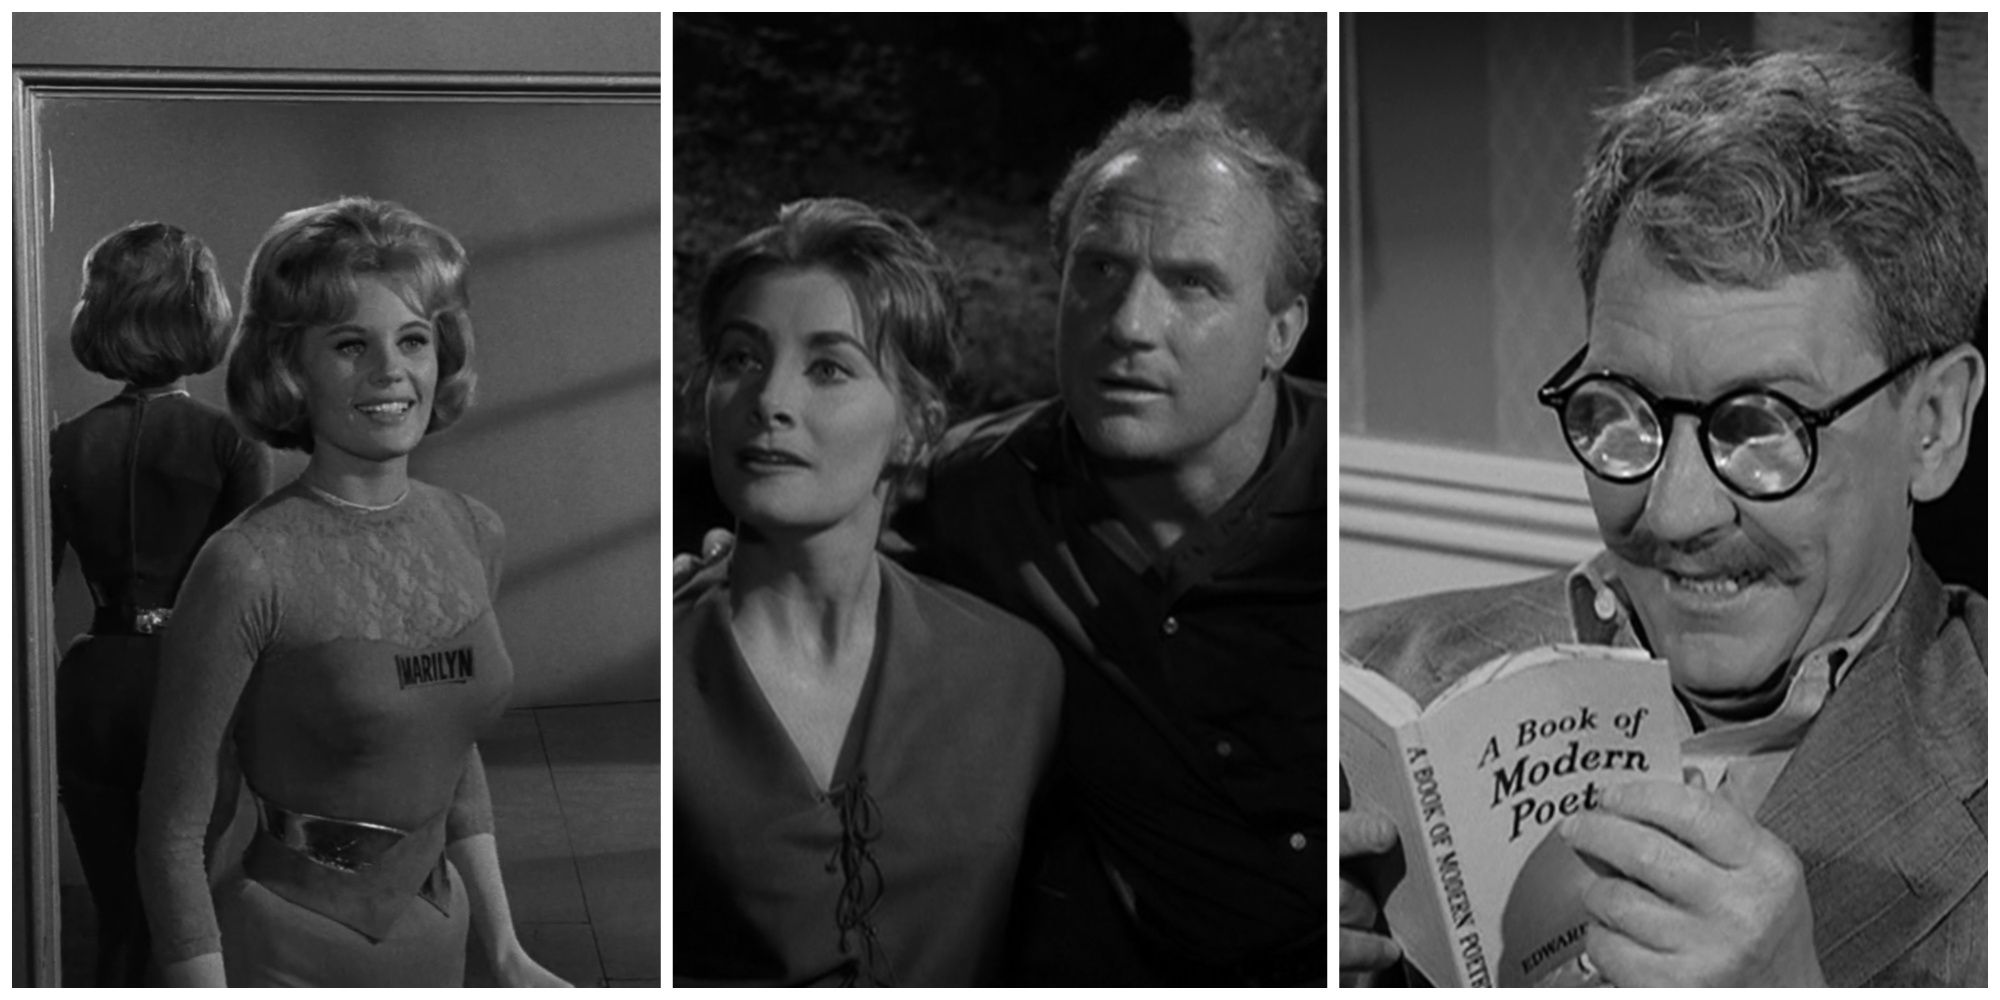 Split image showing scenes from episodes of The Twilight Zone: 